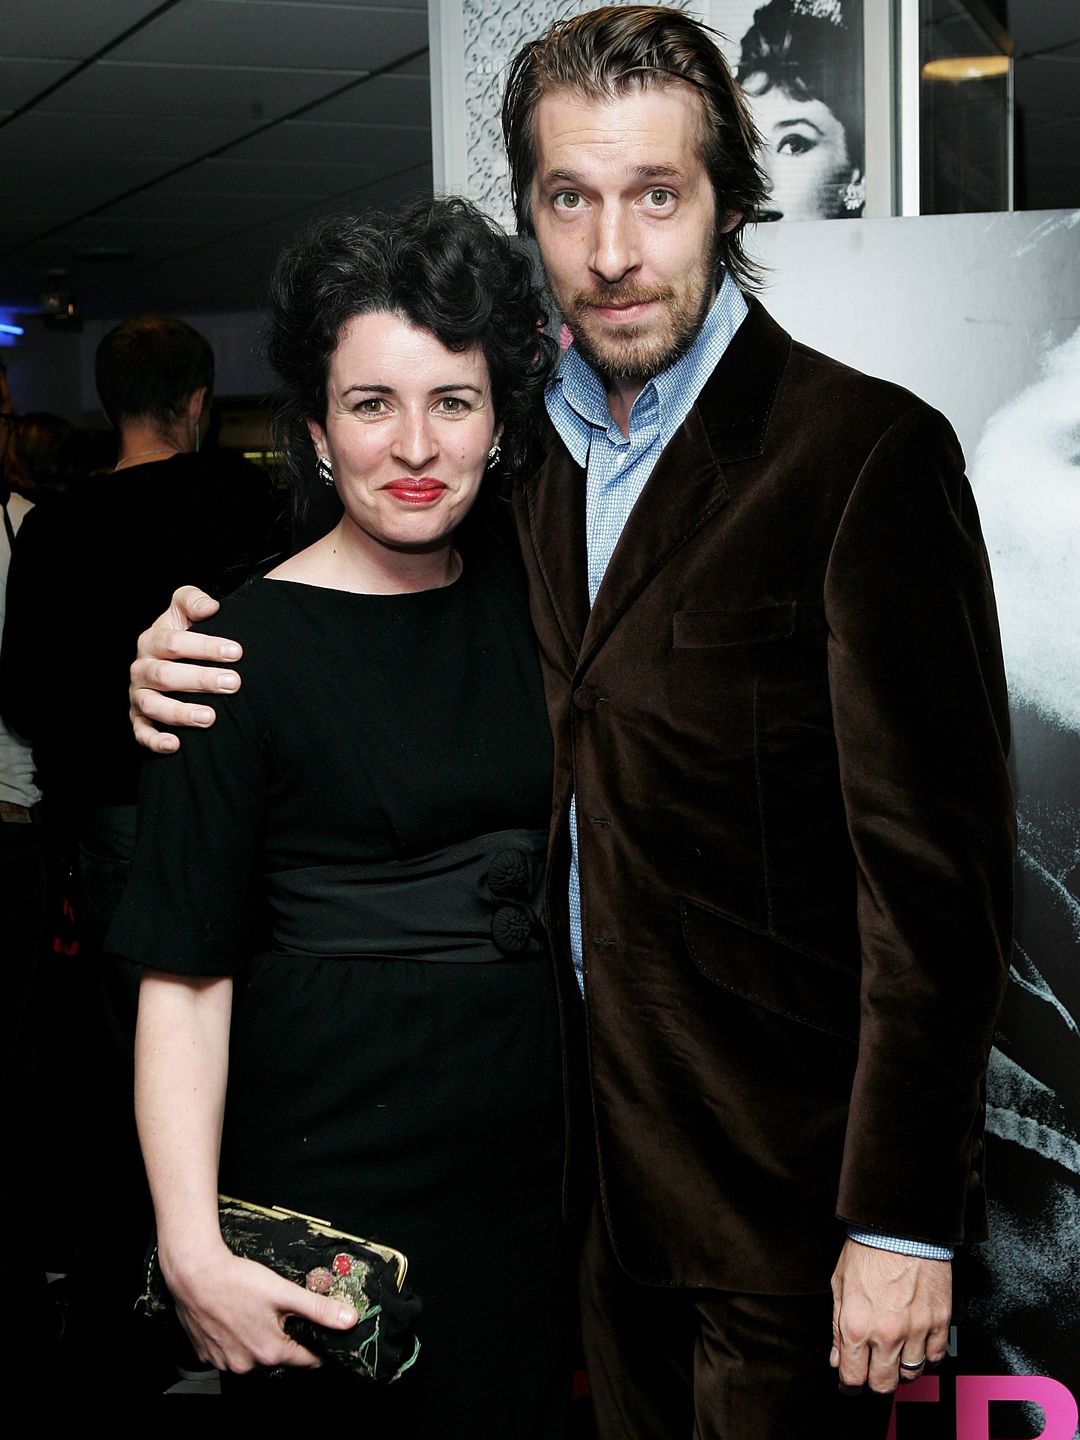 Craig Parkinson in a velvet jacket and his wife in a black dress at the screening of Control in 2007